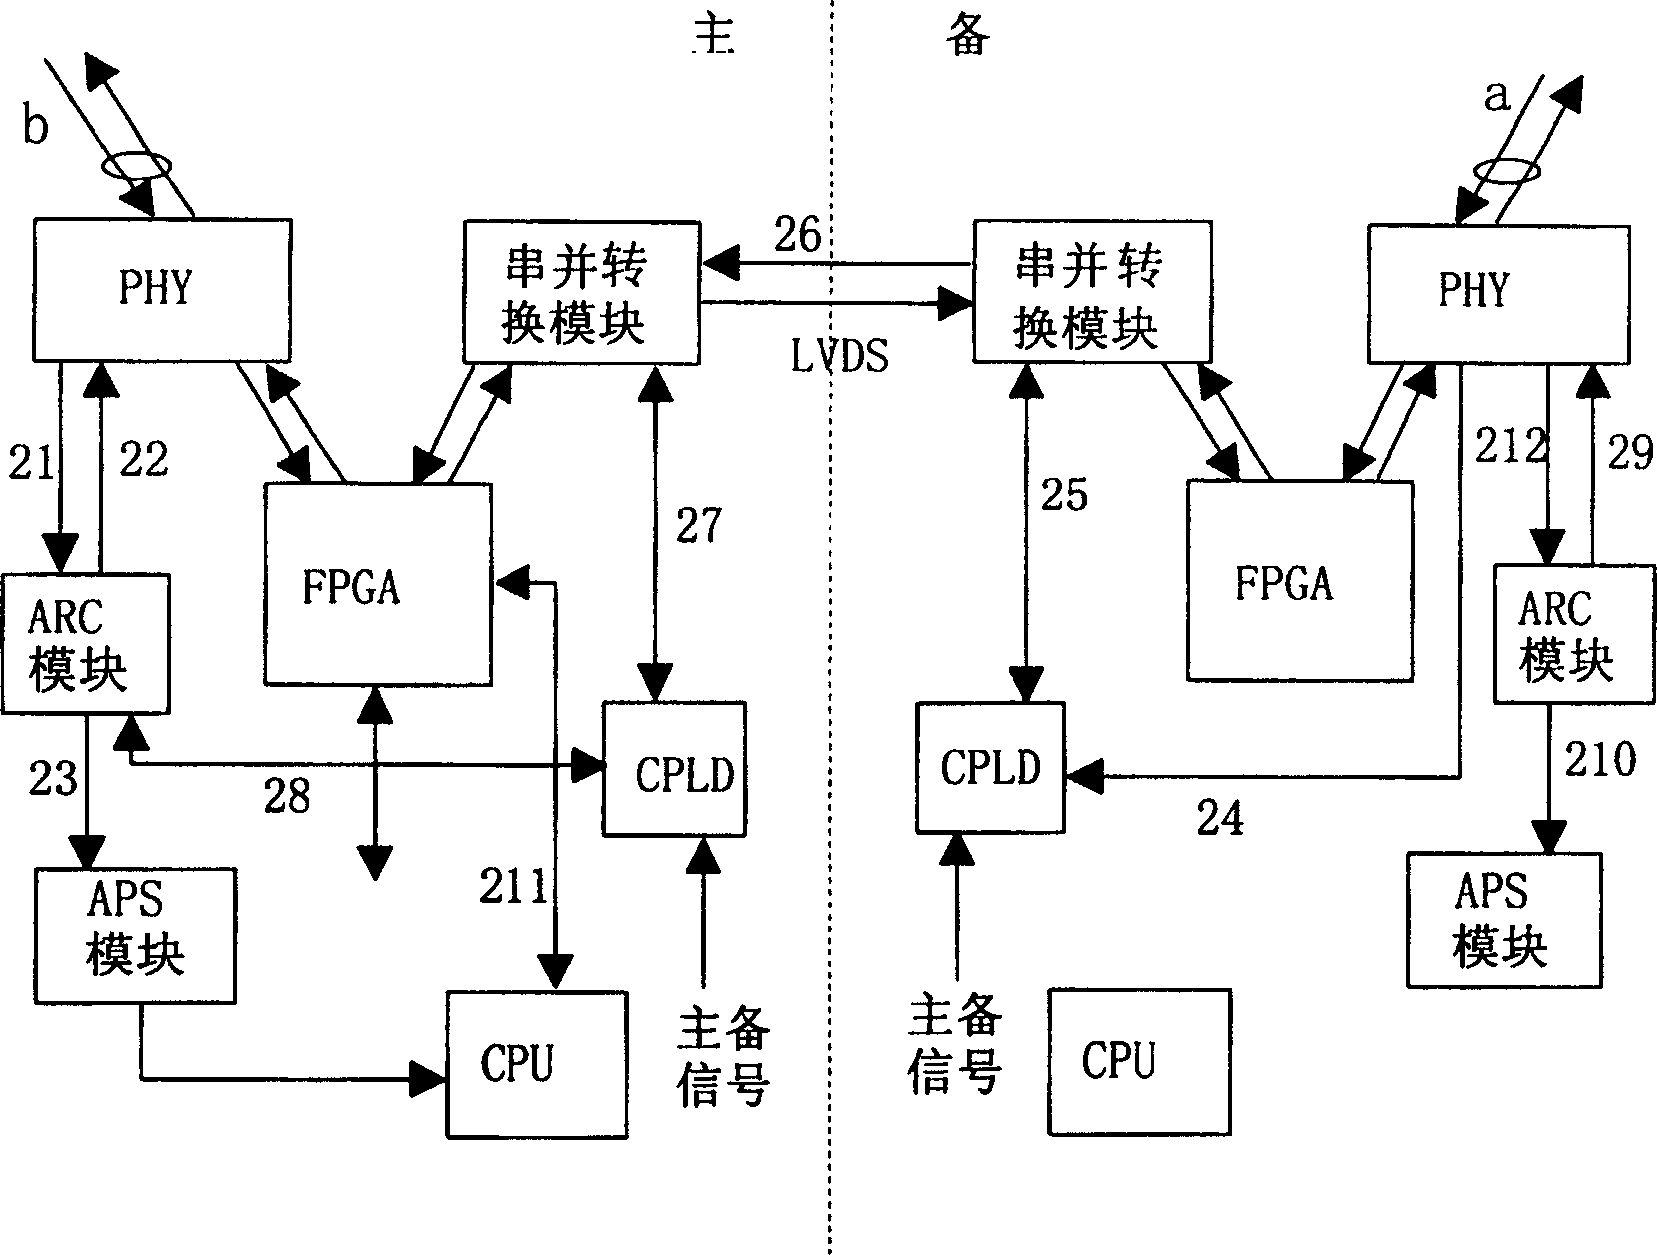 Method for implementing quick optical fibre protective inversion in ring network and its equipment